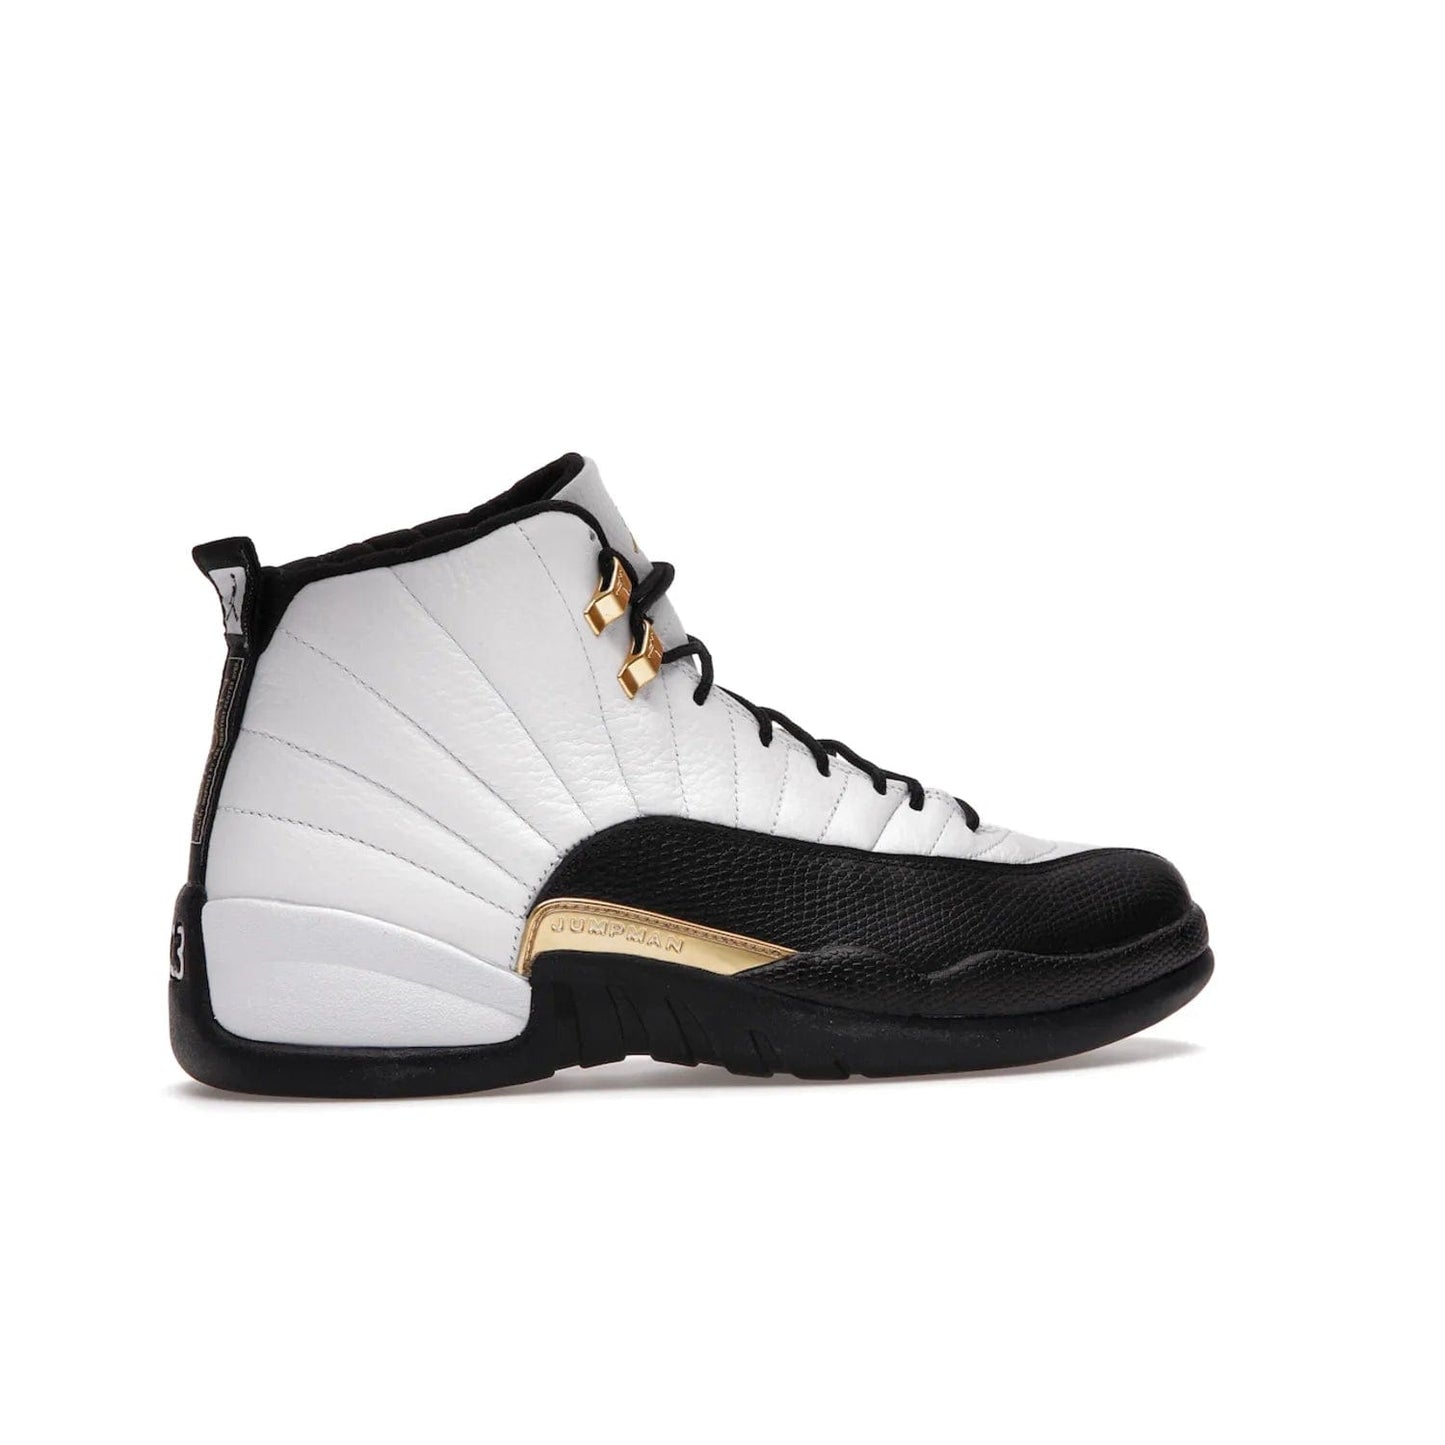 Jordan 12 Retro Royalty Taxi - Image 35 - Only at www.BallersClubKickz.com - Make a statement with the Air Jordan 12 Retro Royalty Taxi. Woven heel tag, gold plaquet, white tumbled leather upper plus a black toe wrap, make this modern take on the classic a must-have. Available in November 2021.